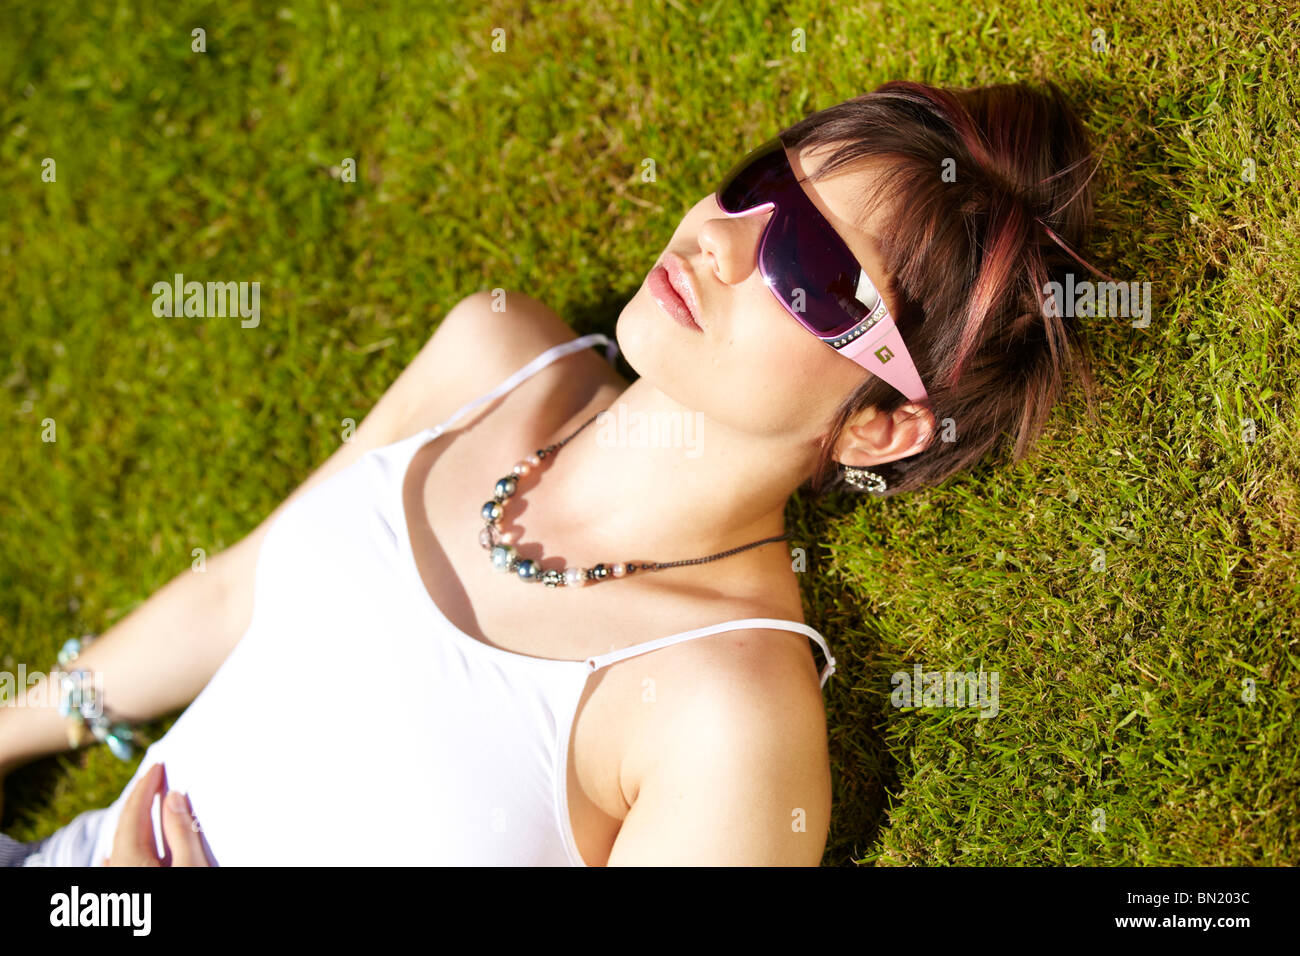 Girl lying on grass Banque D'Images